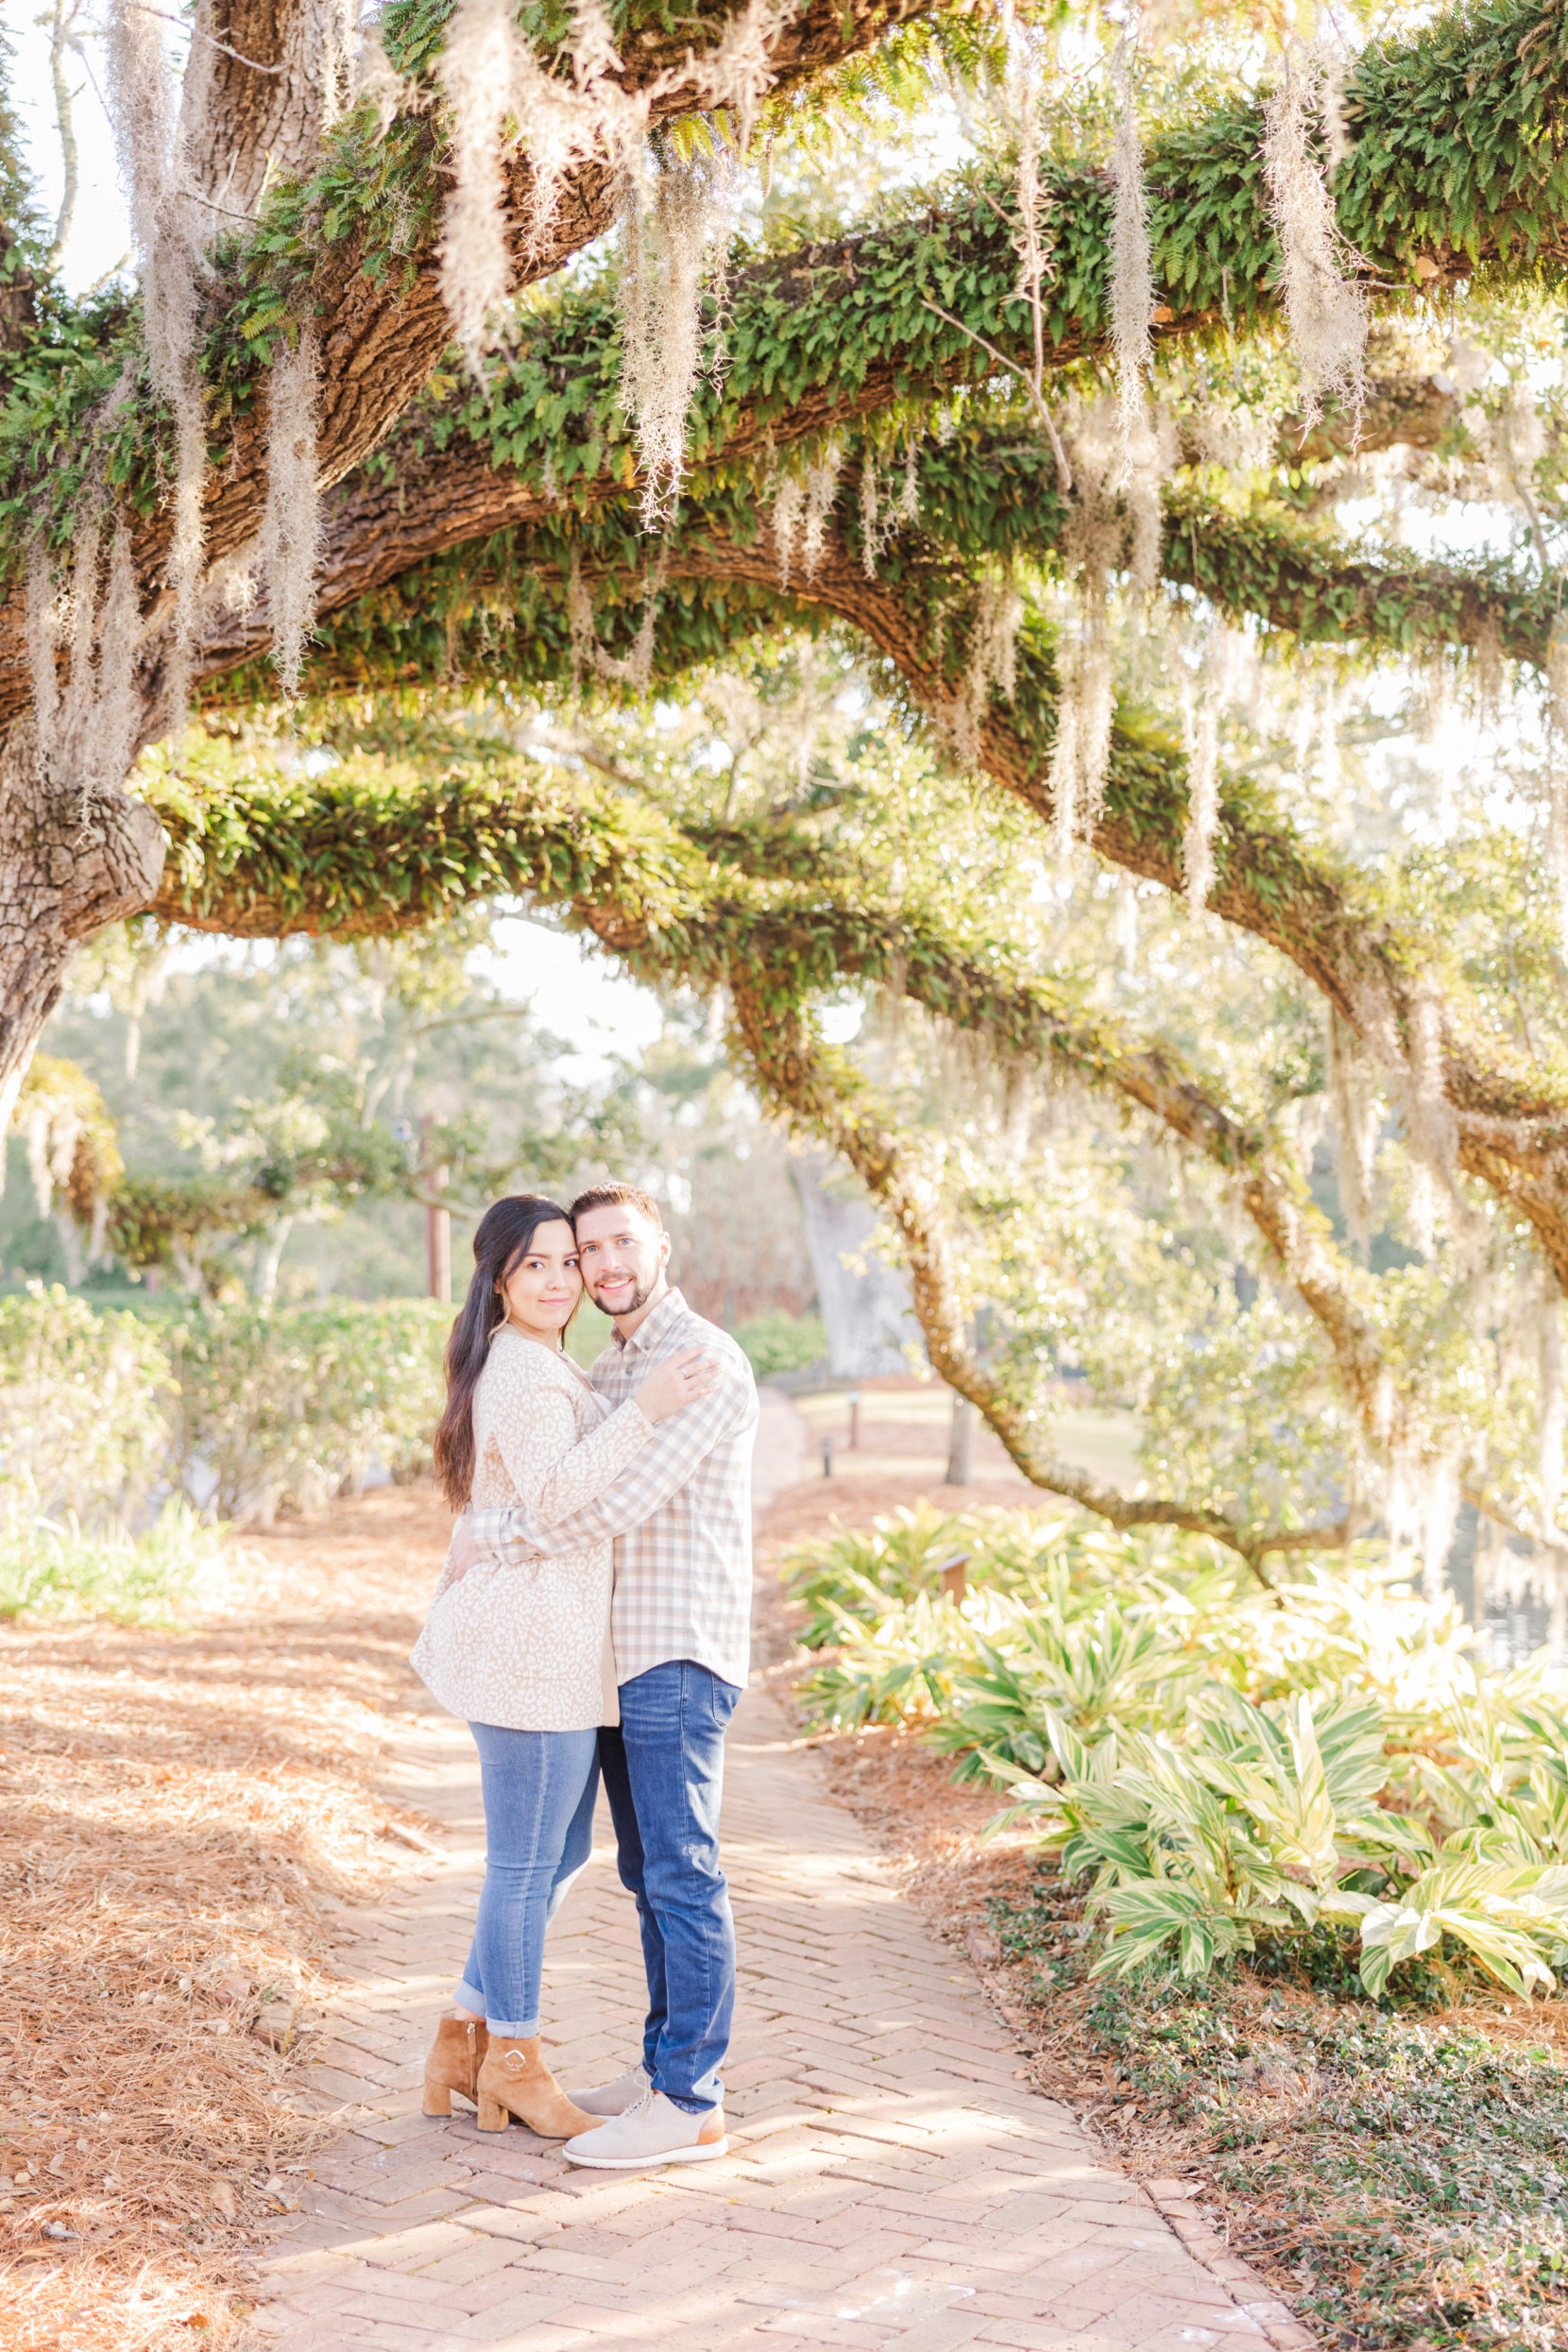 Grand Hotel Engagement Point Clear Alabama013